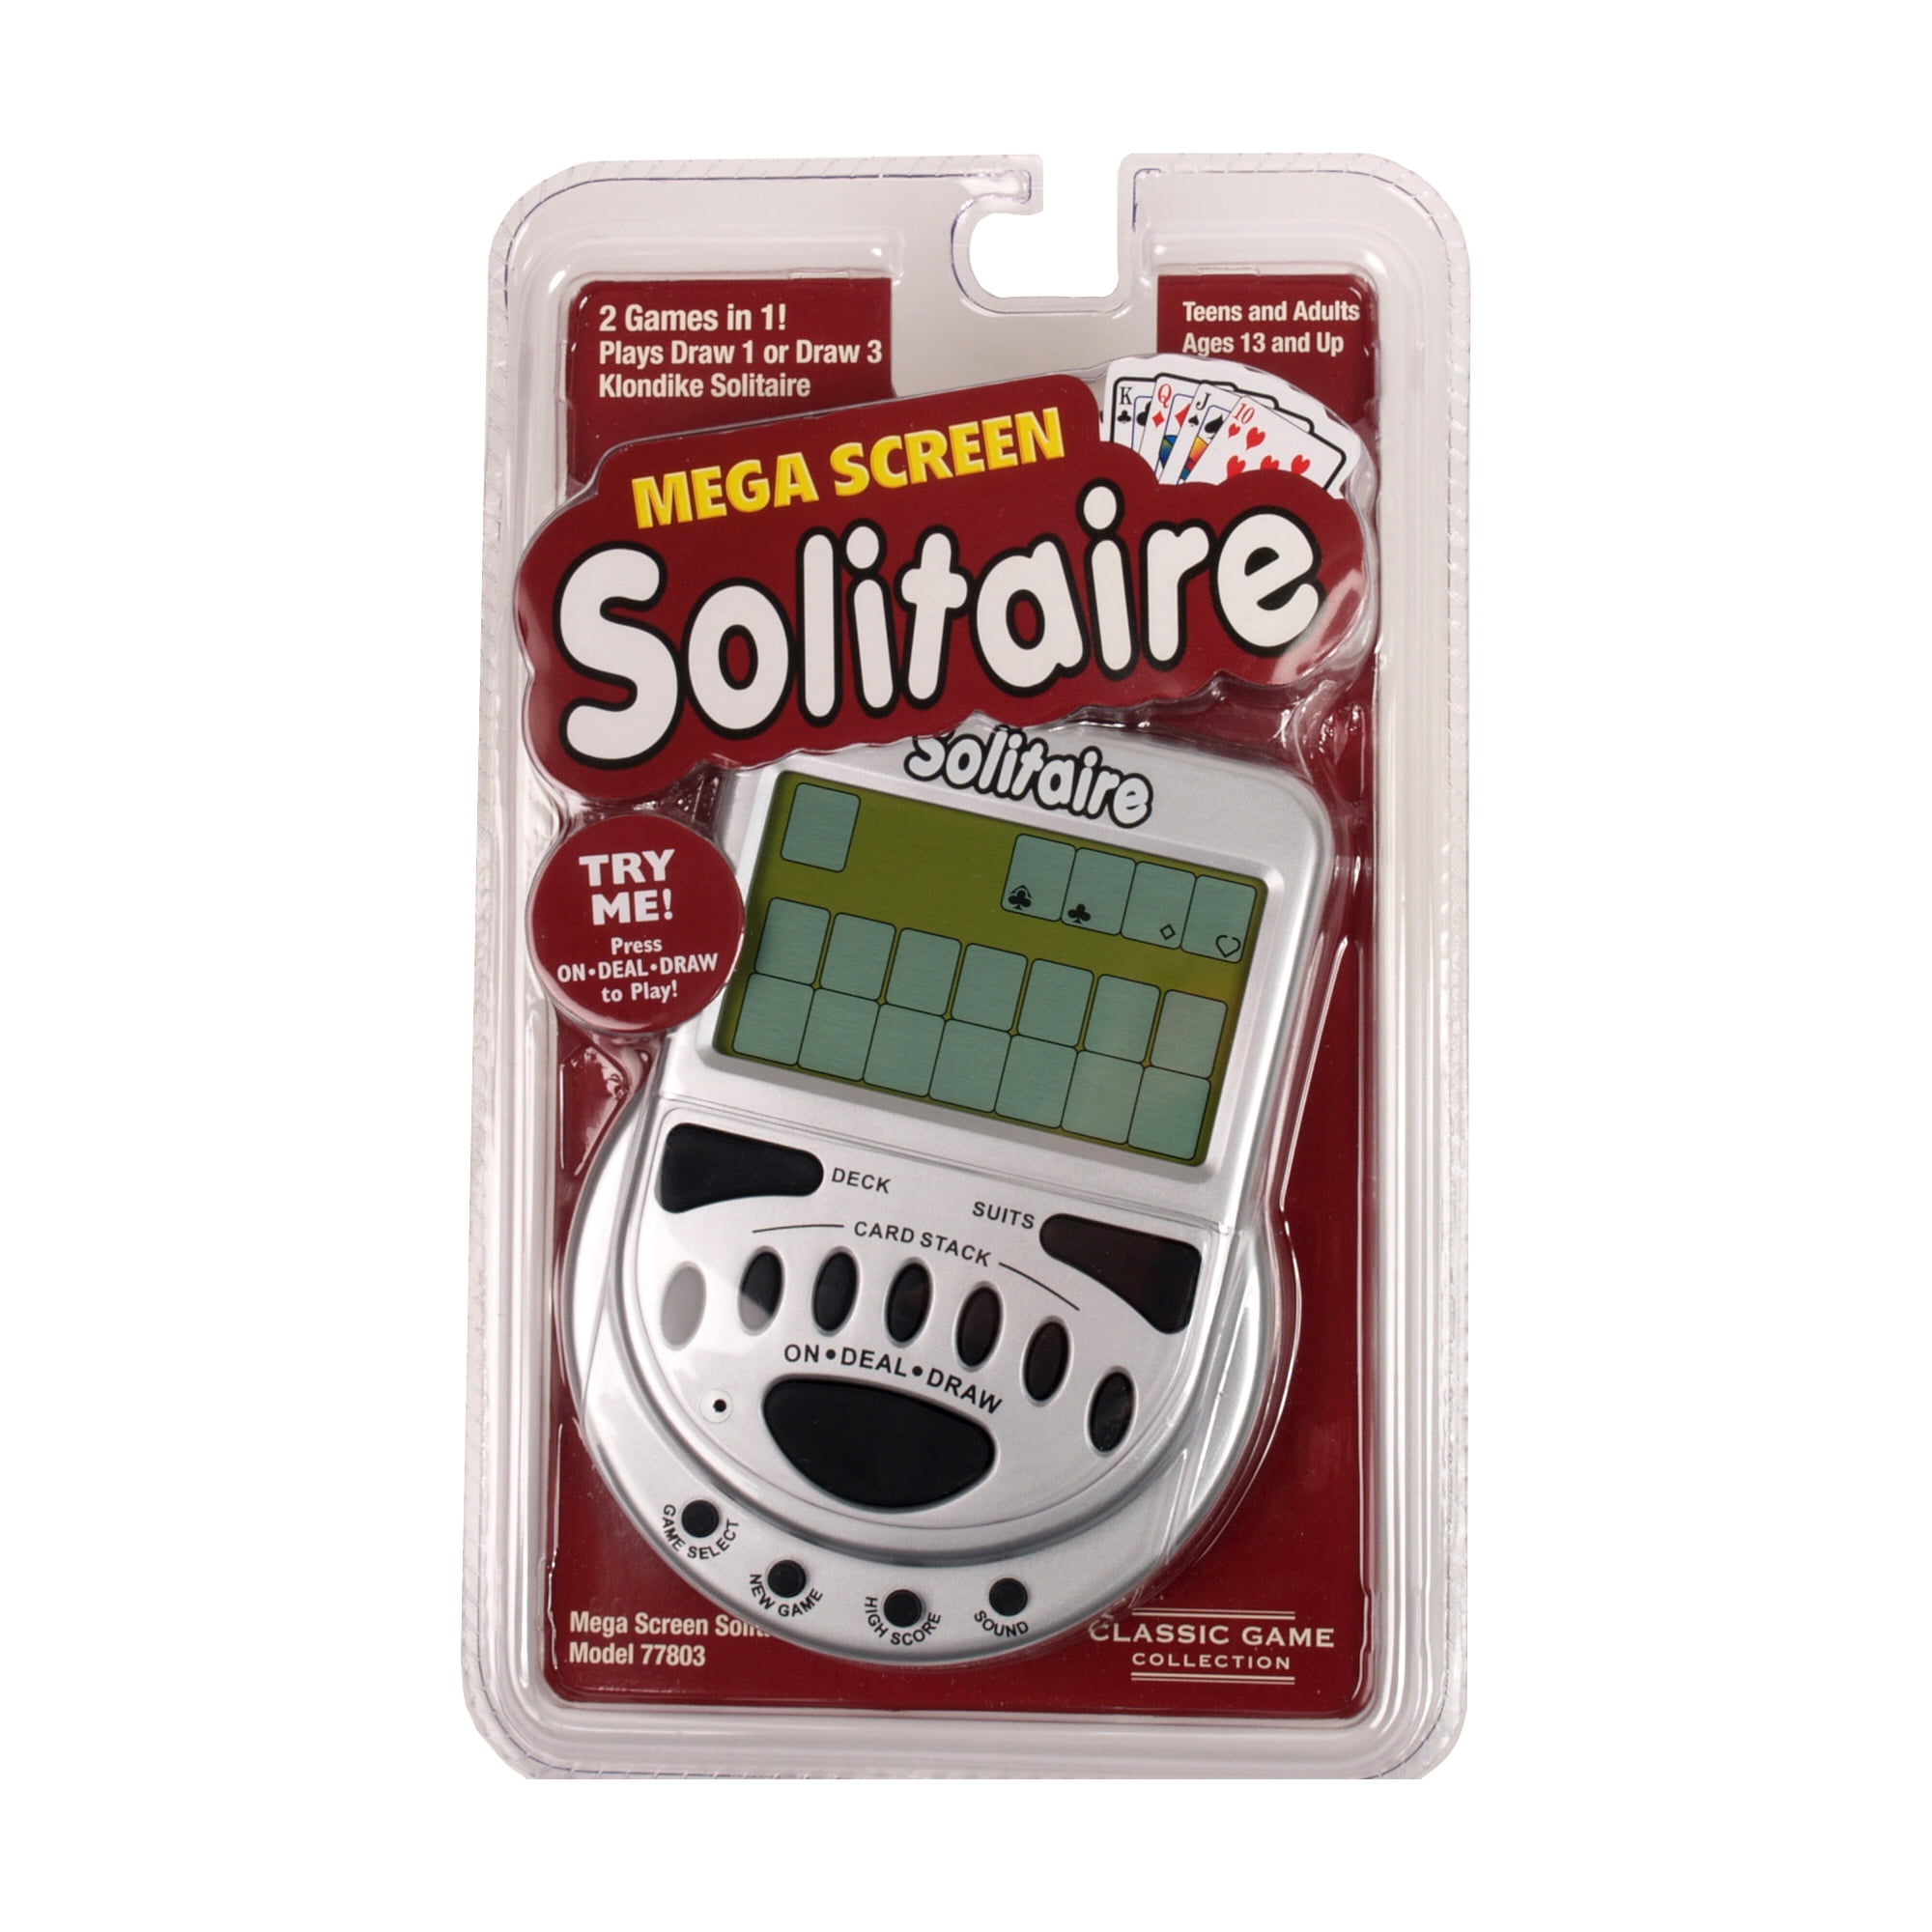 Mega Screen Solitaire Game Electronic Handheld Game Draw 1 Draw 3 New 